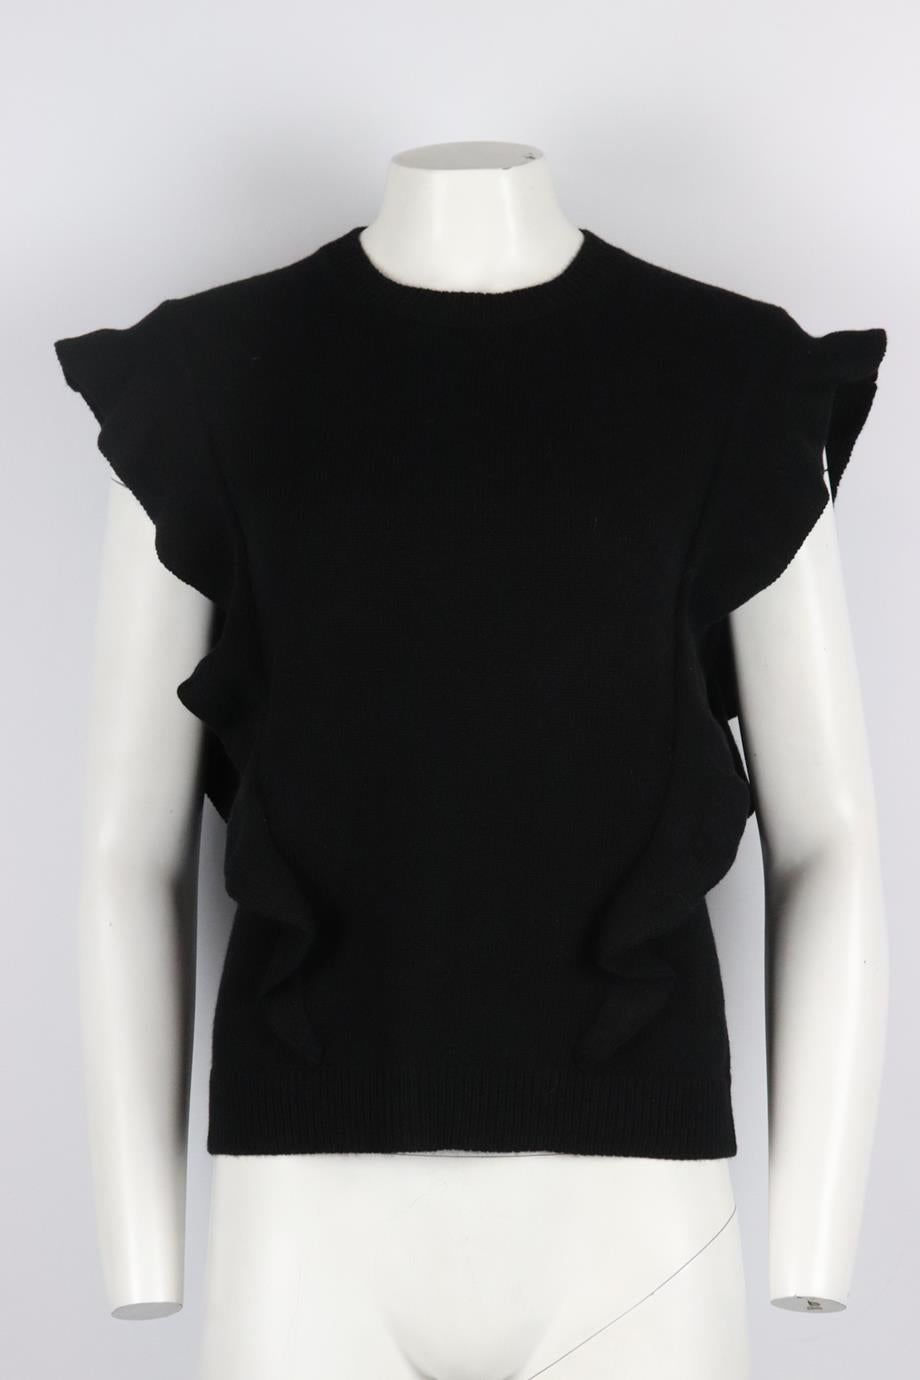 Chloé ruffled cashmere sweater. Black. Sleeveless, crewneck. Slips on. 100% Cashmere. Size: Large (UK 12, US 8, FR 40, IT 44). Bust: 37 in. Waist: 35.4 in. Hips: 34.8 in. Length: 22.5 in. Very good condition - No sign of wear; see pictures.